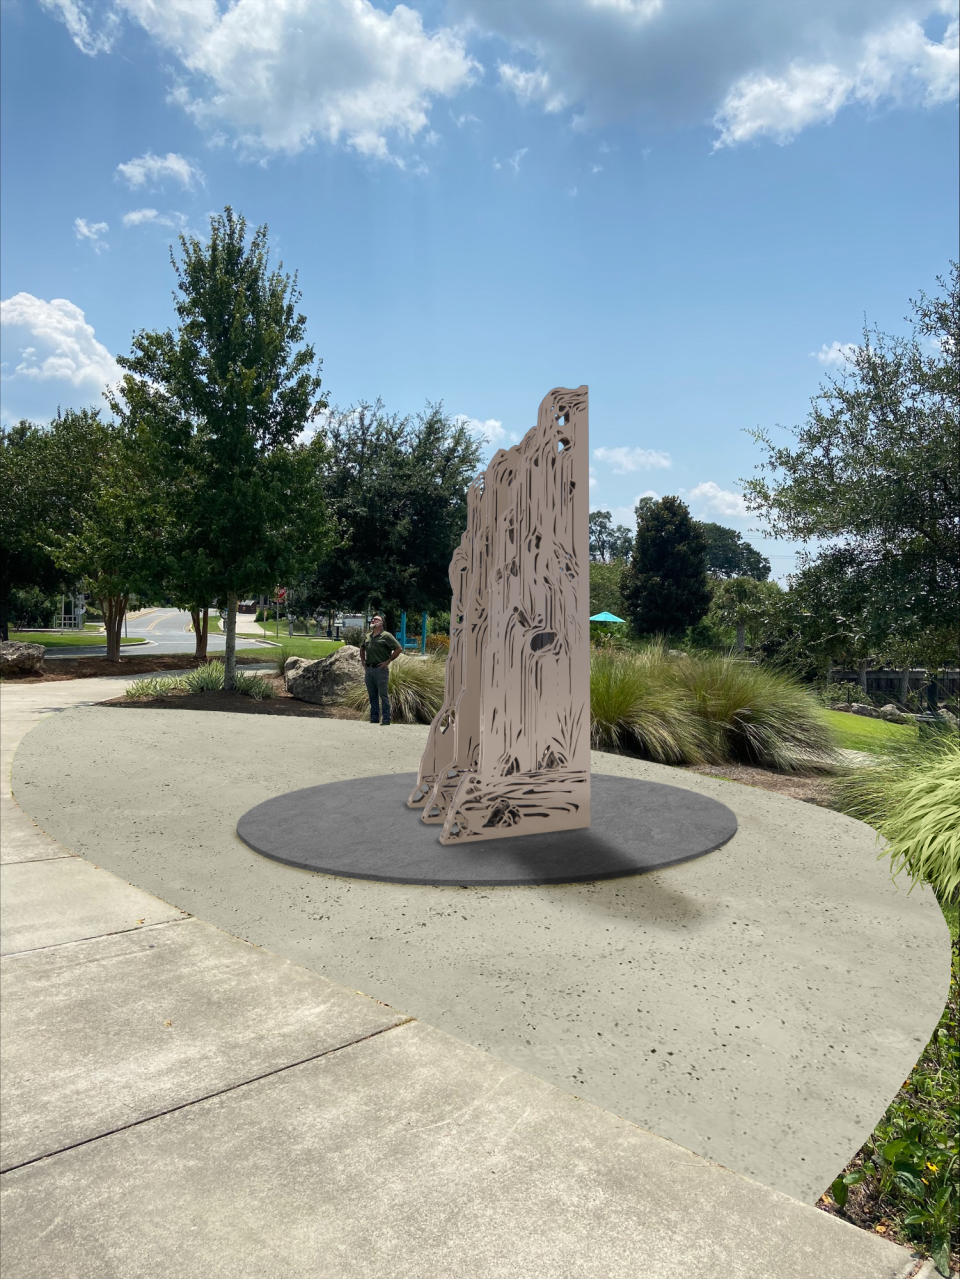 Early rendering, created by the Florida State University Master Craftsman Studio, shows a proposed sculpture for Cascades Park in honor of Tallahassee's bicentennial anniversary.